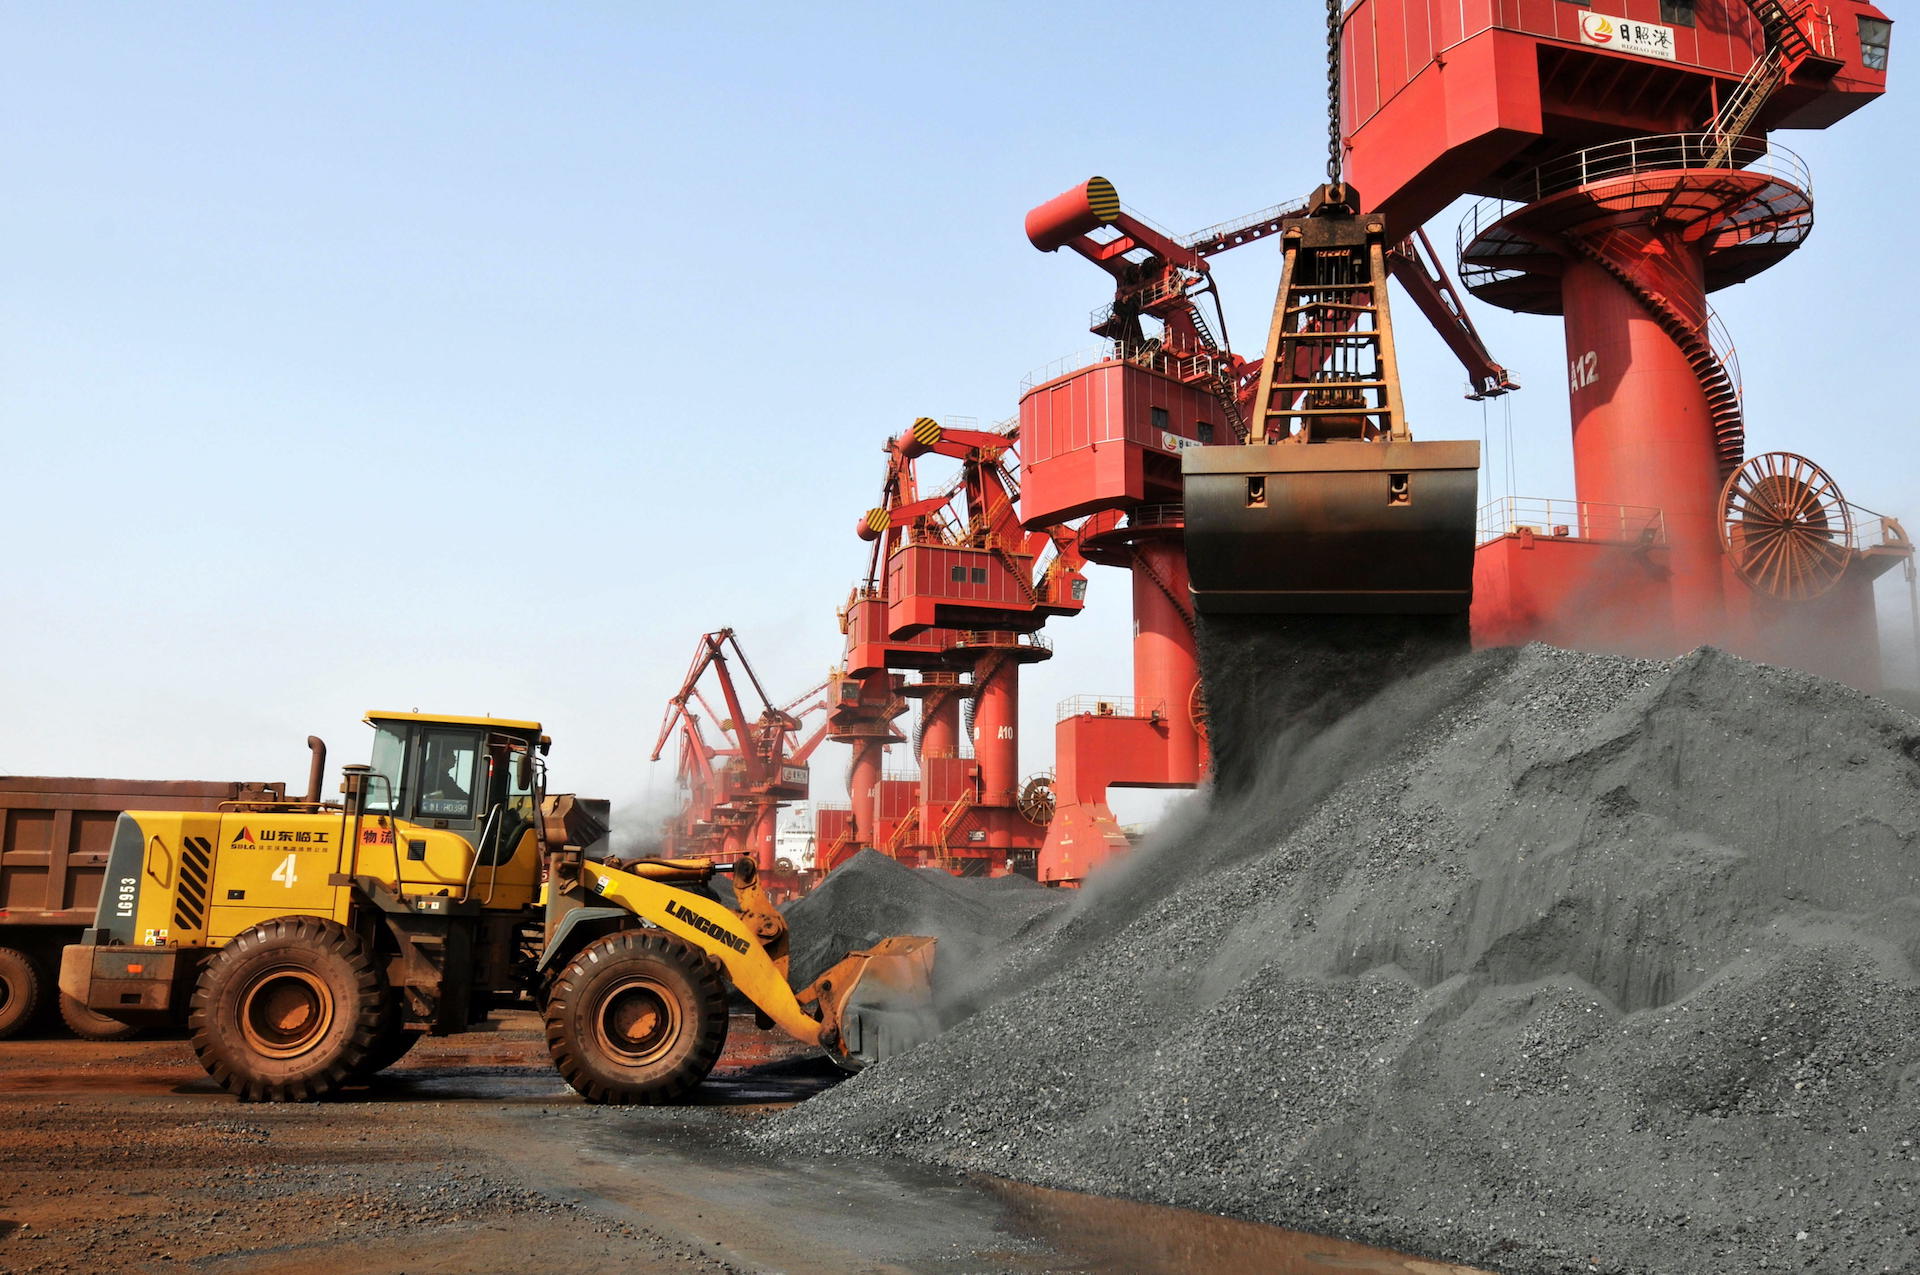 <p>Iron ore imported from Peru is loaded onto trucks at the Port of Rizhao, Rizhao city, east China&#8217;s Shandong province (image: Alamy)</p>